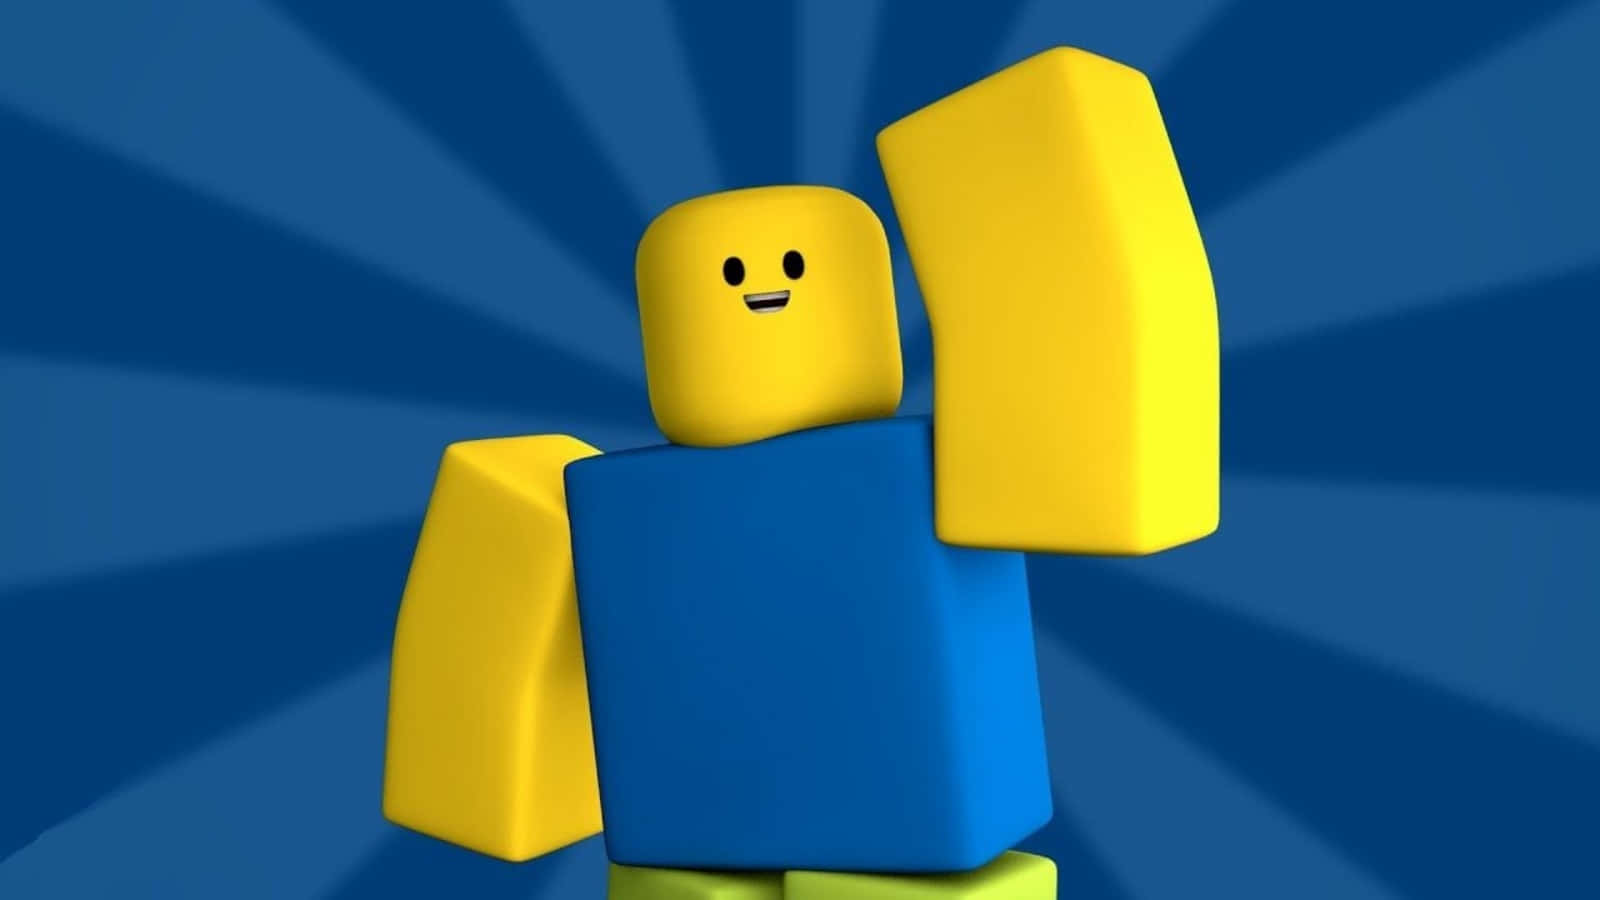 Man face in 2023  Roblox guy, Roblox funny, Roblox